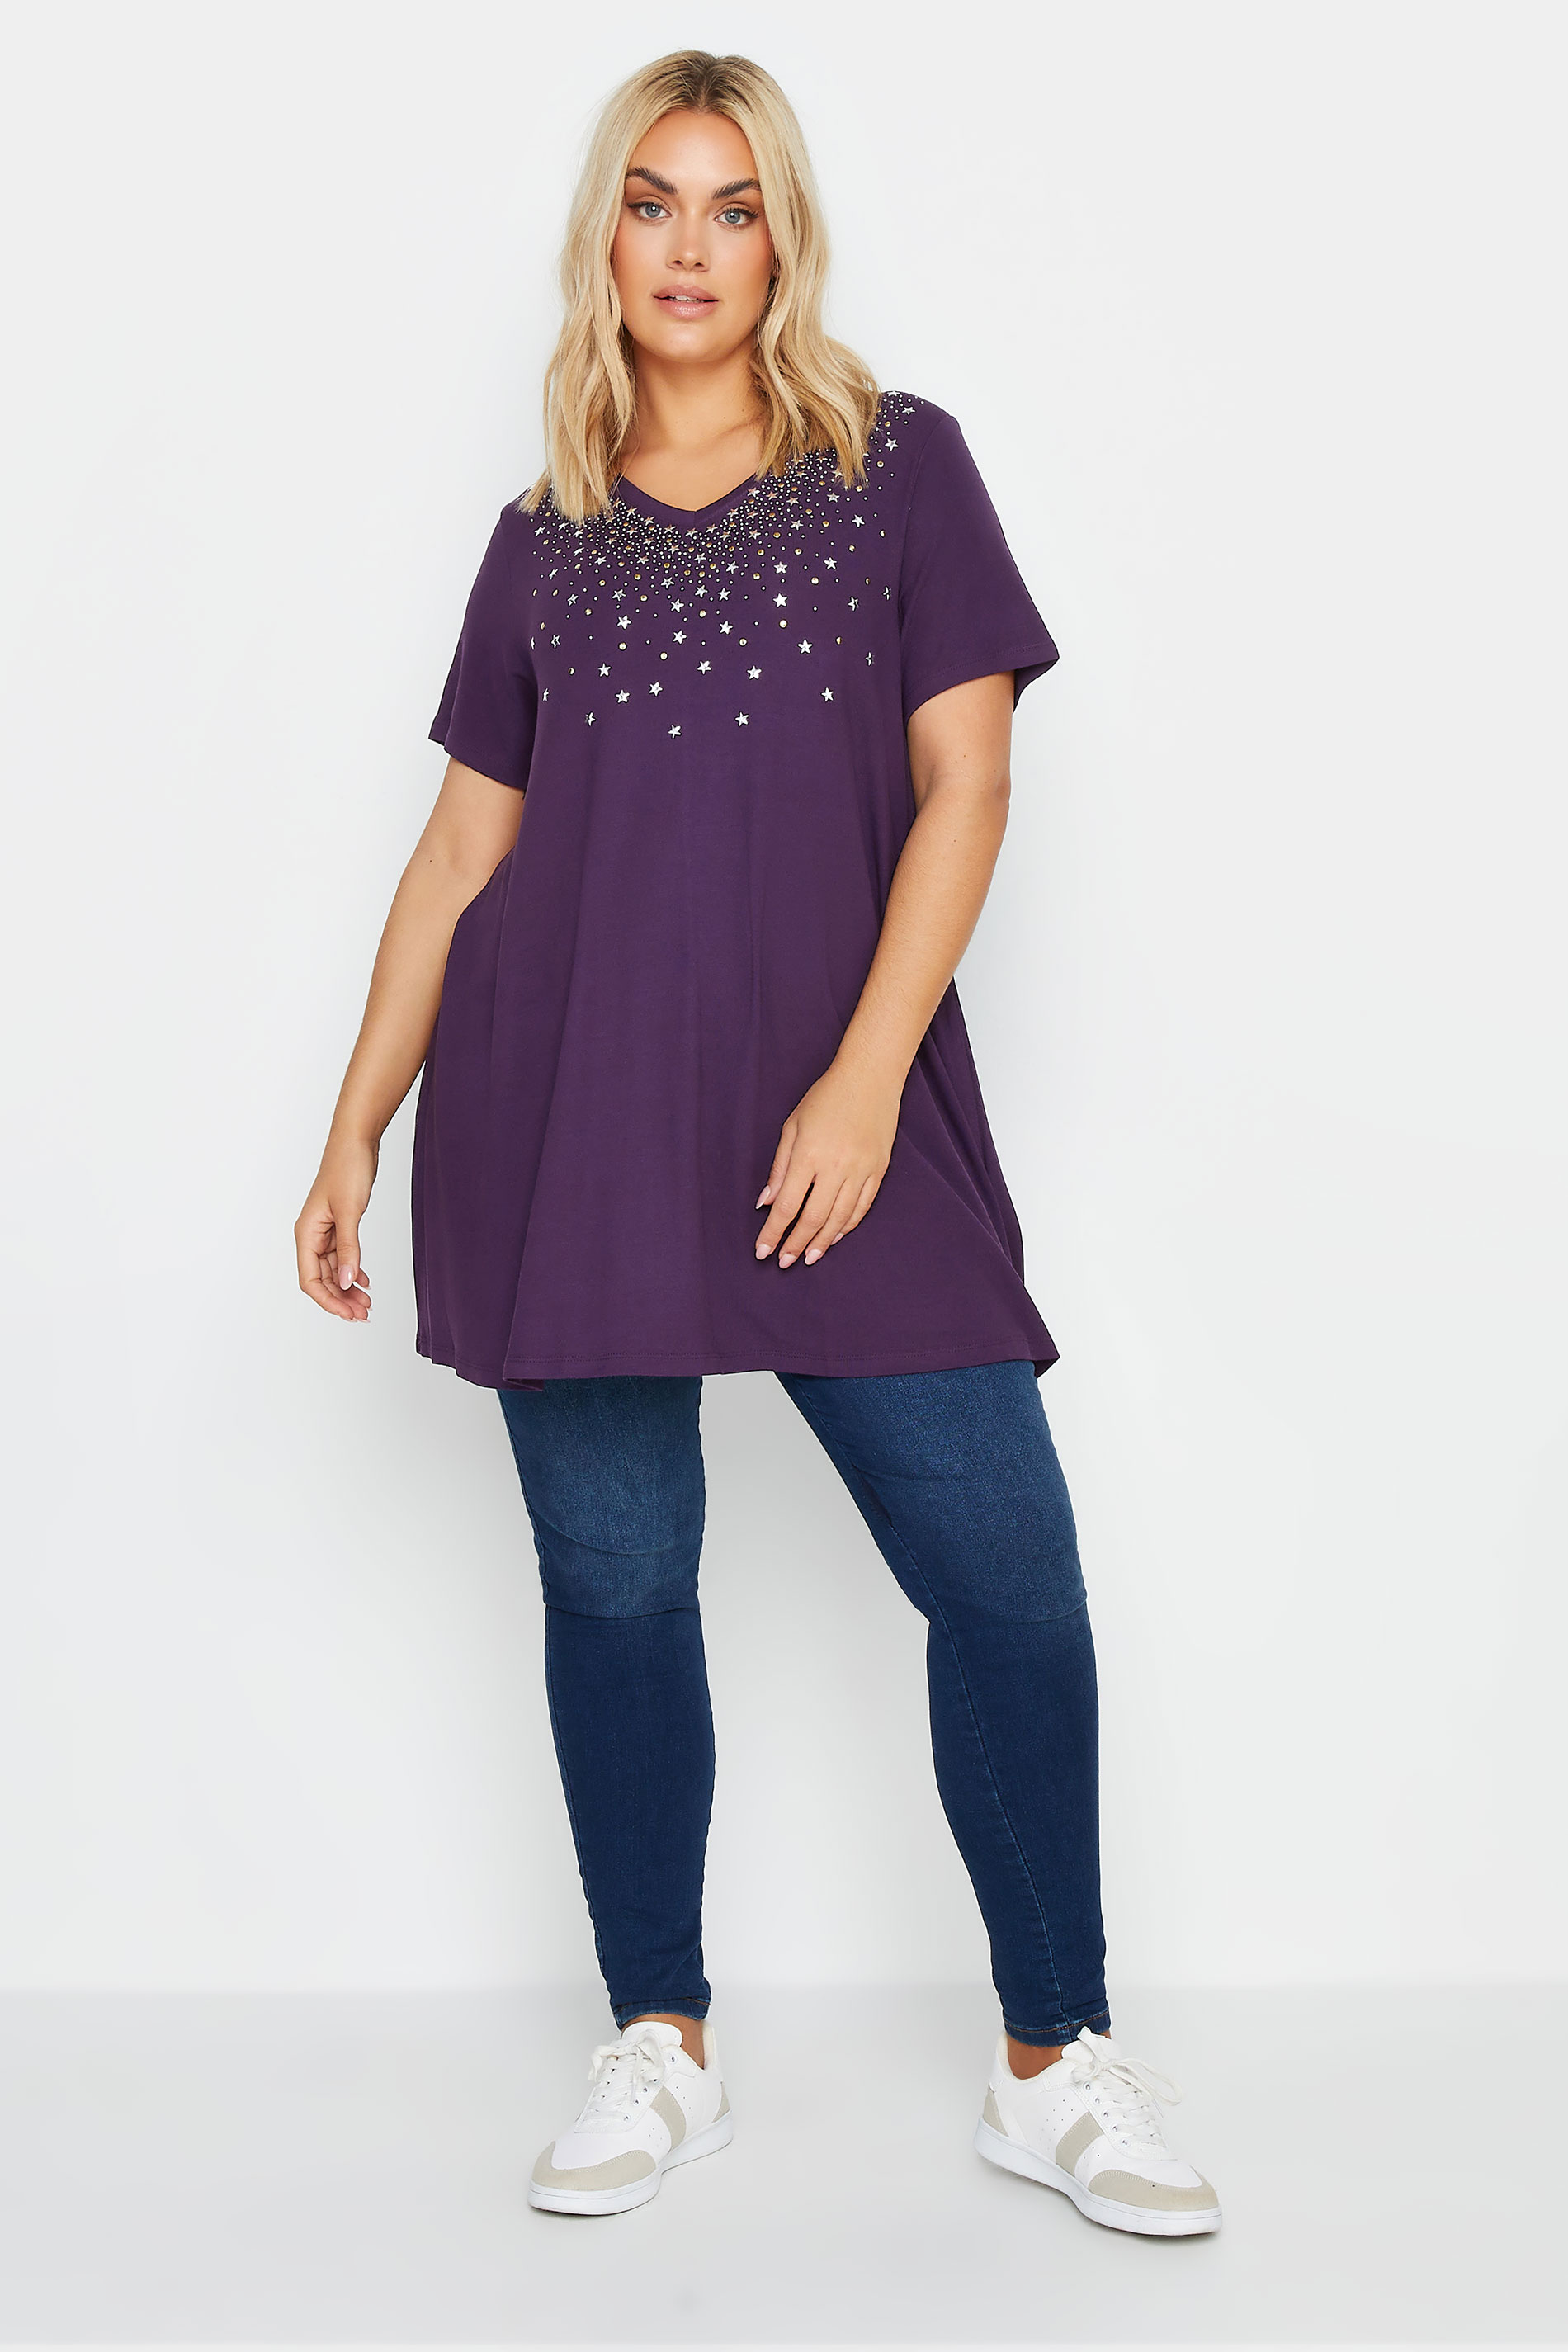 YOURS Plus Size Purple Star Stud Embellished Top | Yours Clothing 2